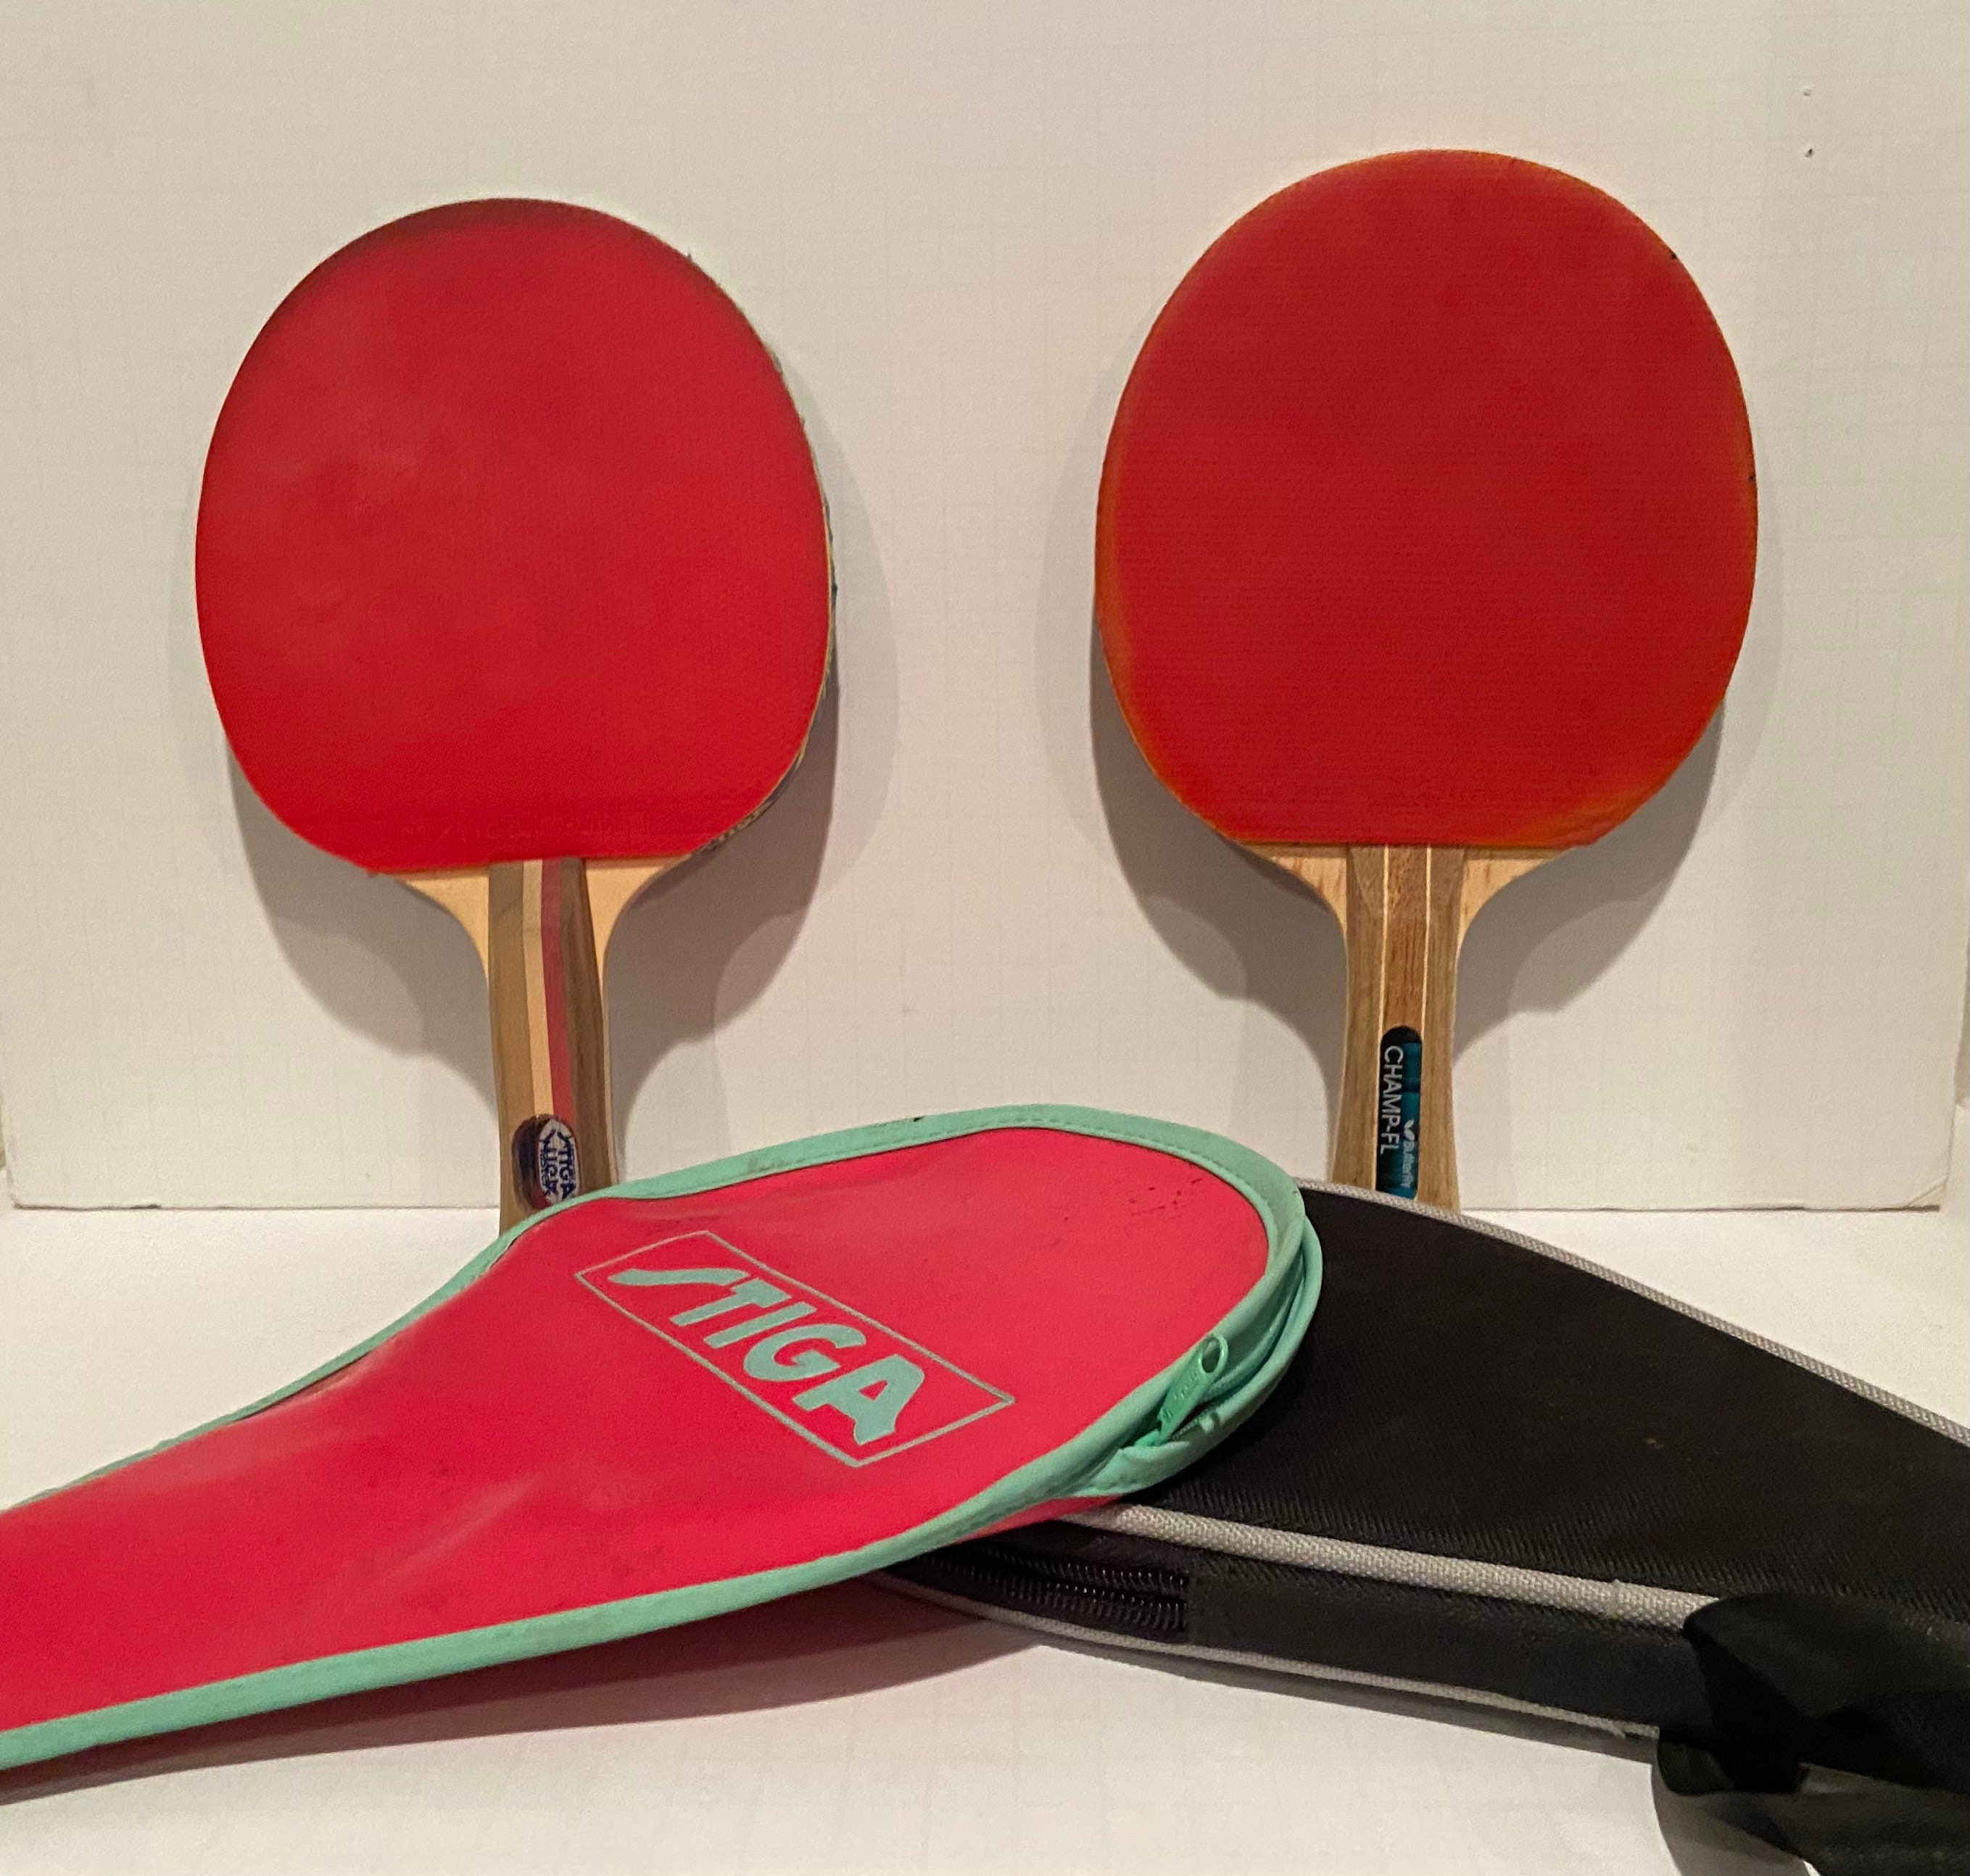 Pair of vintage Stiga and Champ rubber table tennis Ping Pong